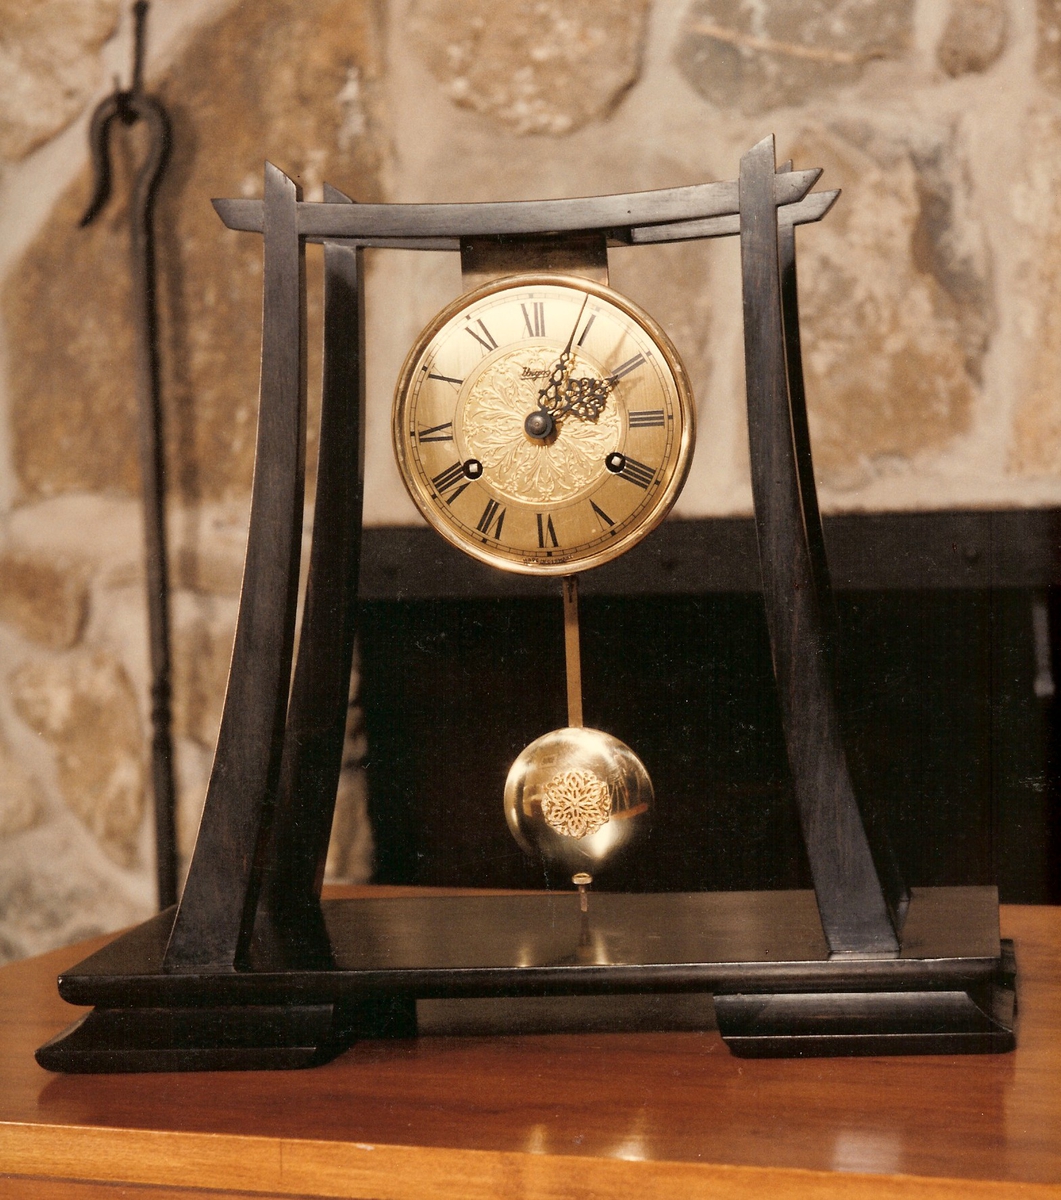 Oriental Gate Clock by Taghkanic Woodworking LLC at CustomMade.com